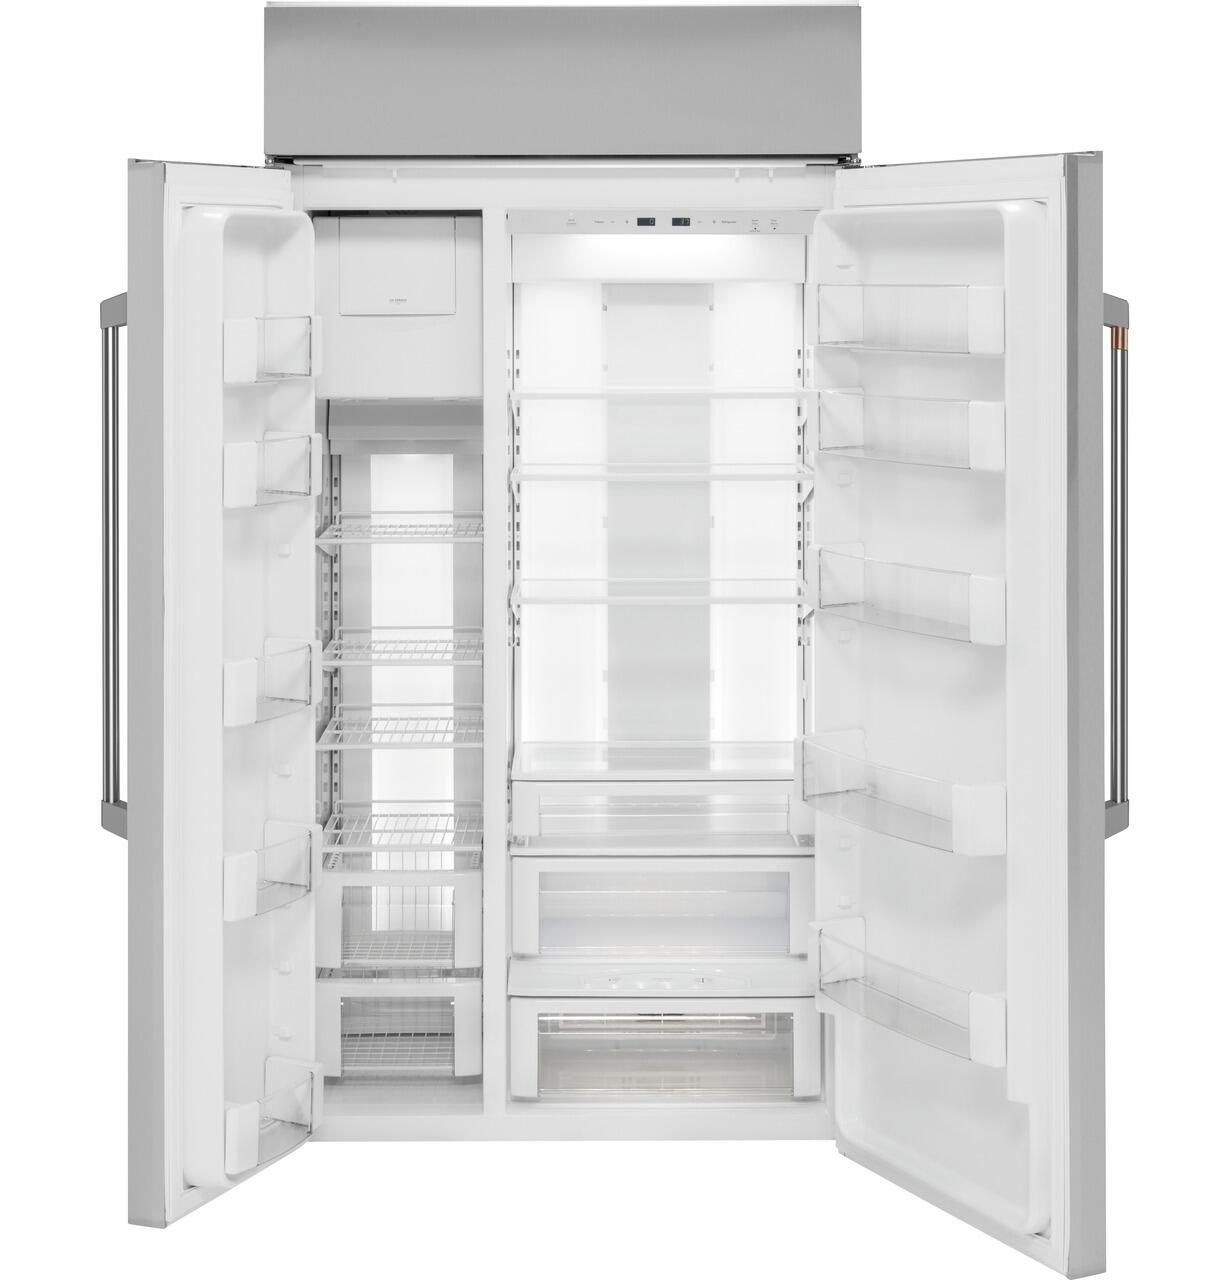 Cafe CSB42WP2RS1 Café&#8482; 42" Smart Built-In Side-By-Side Refrigerator